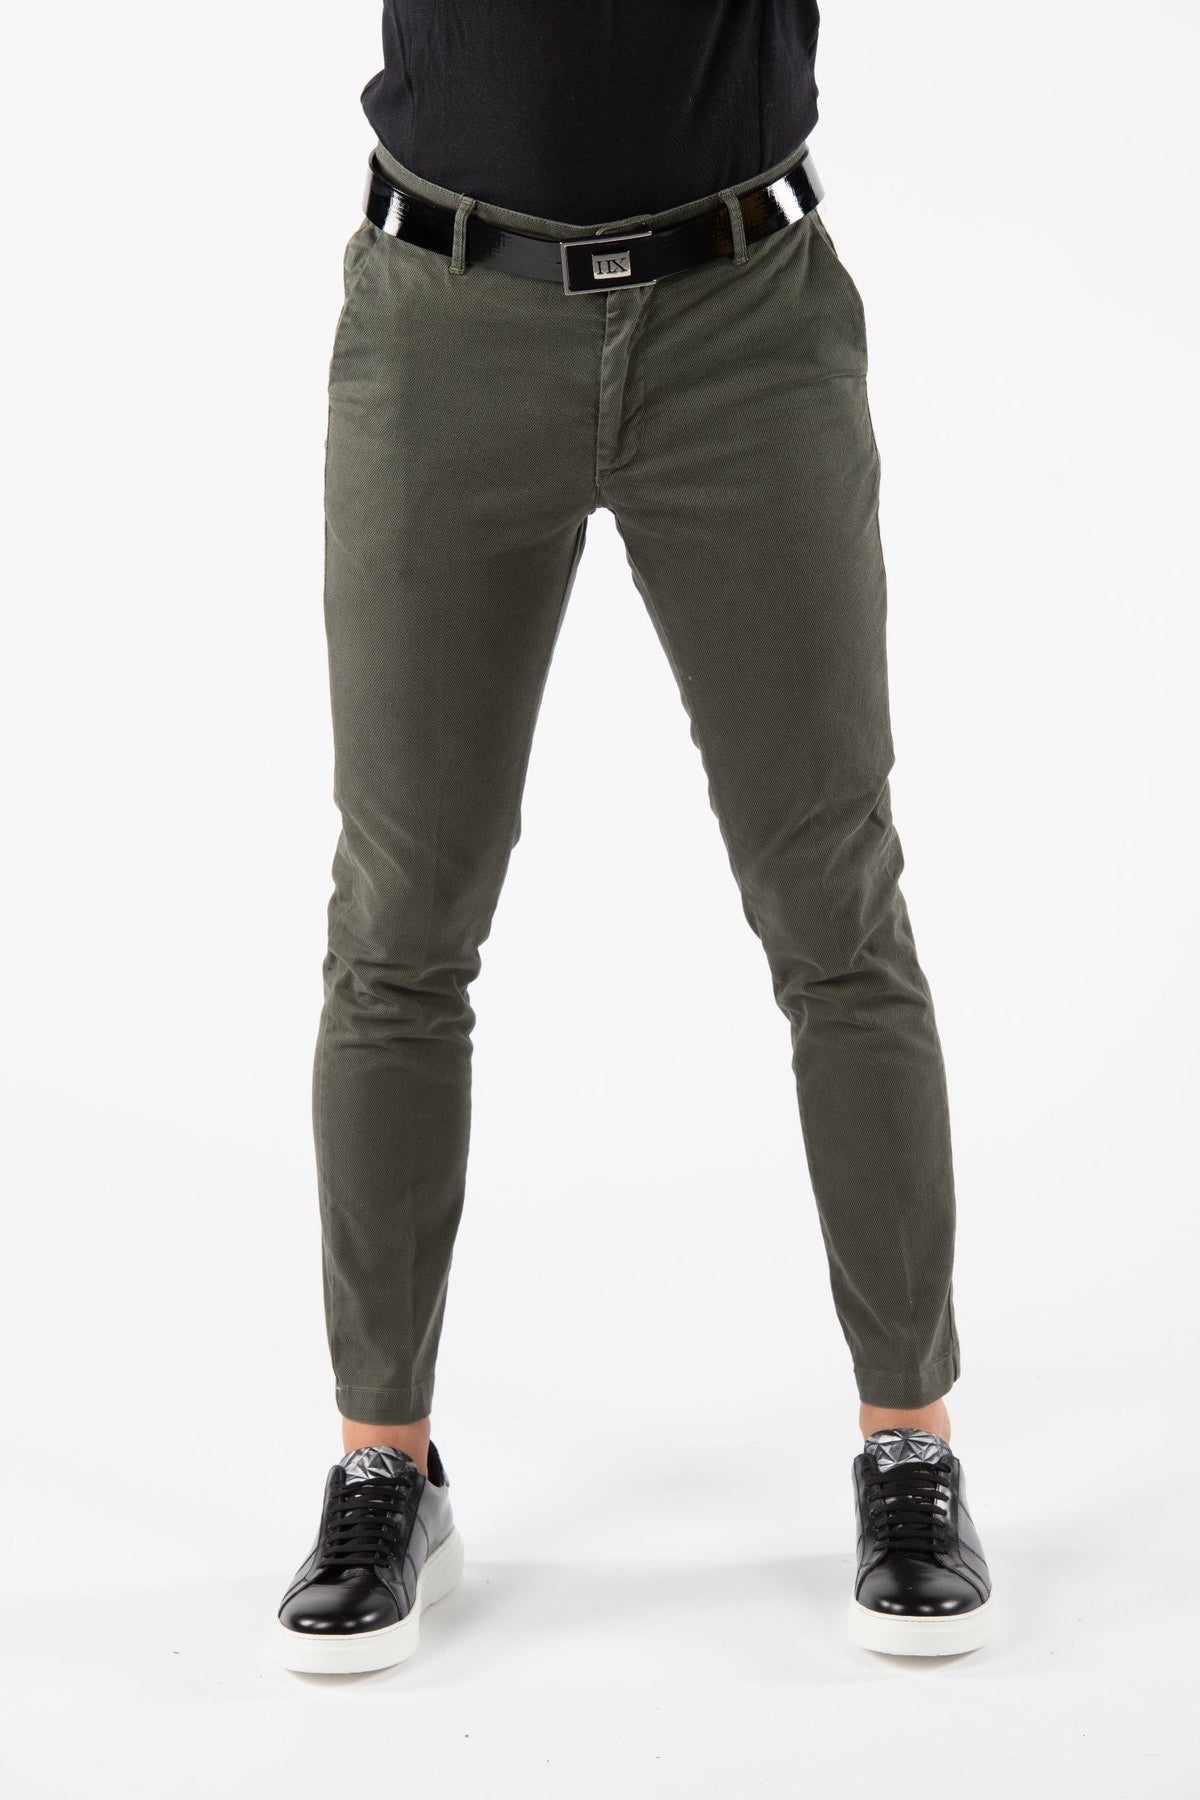 Pantalone hampstead in microtrama front